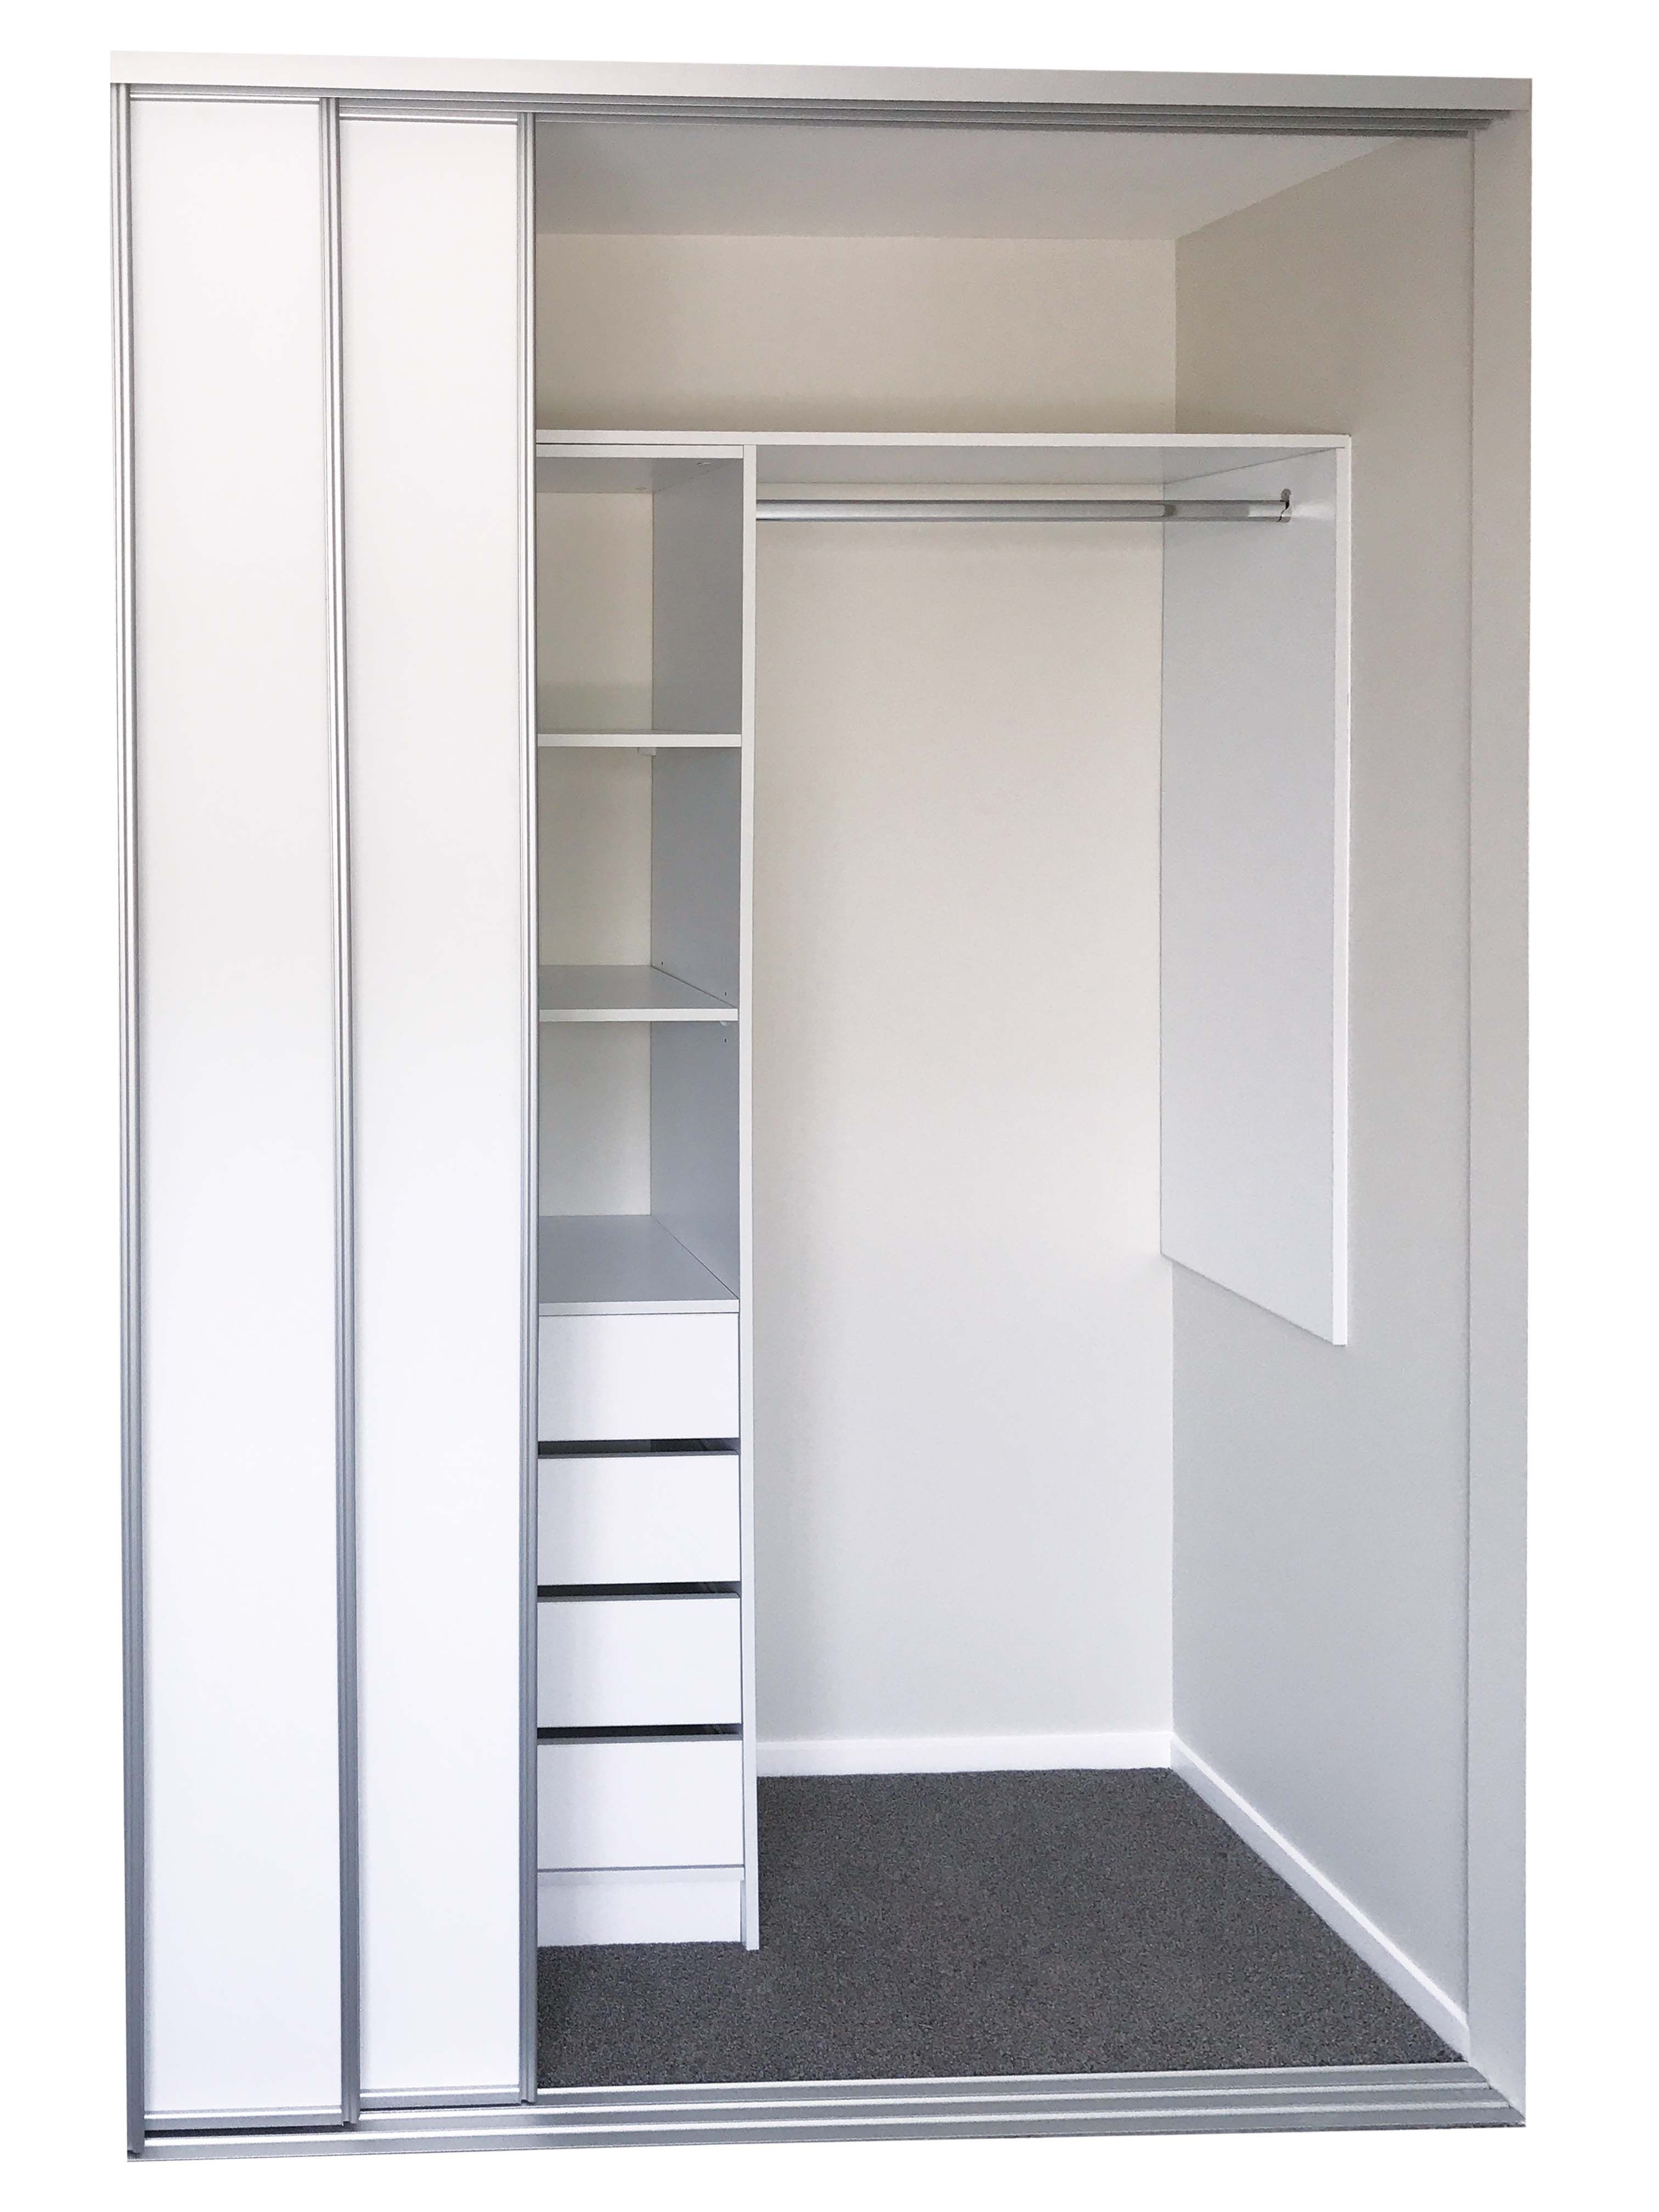 Genesis Modular Floor Standing Wardrobe Shelving | Showerwell Home Products In 3 Shelving Towers Wardrobes (View 6 of 15)